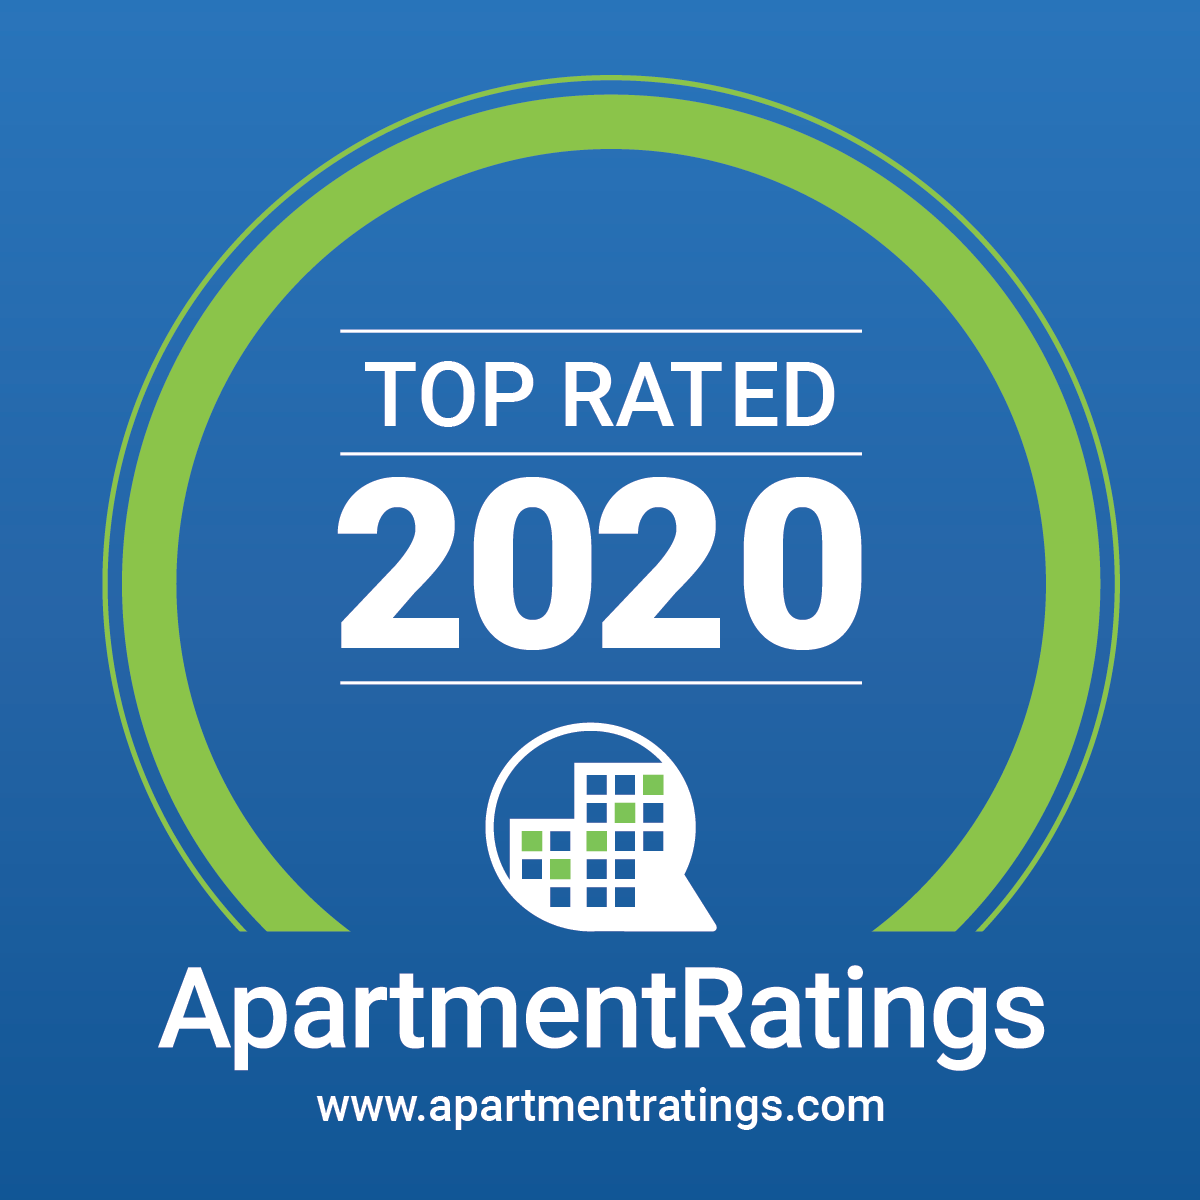 Top Rated 2020 Apartment Ratings